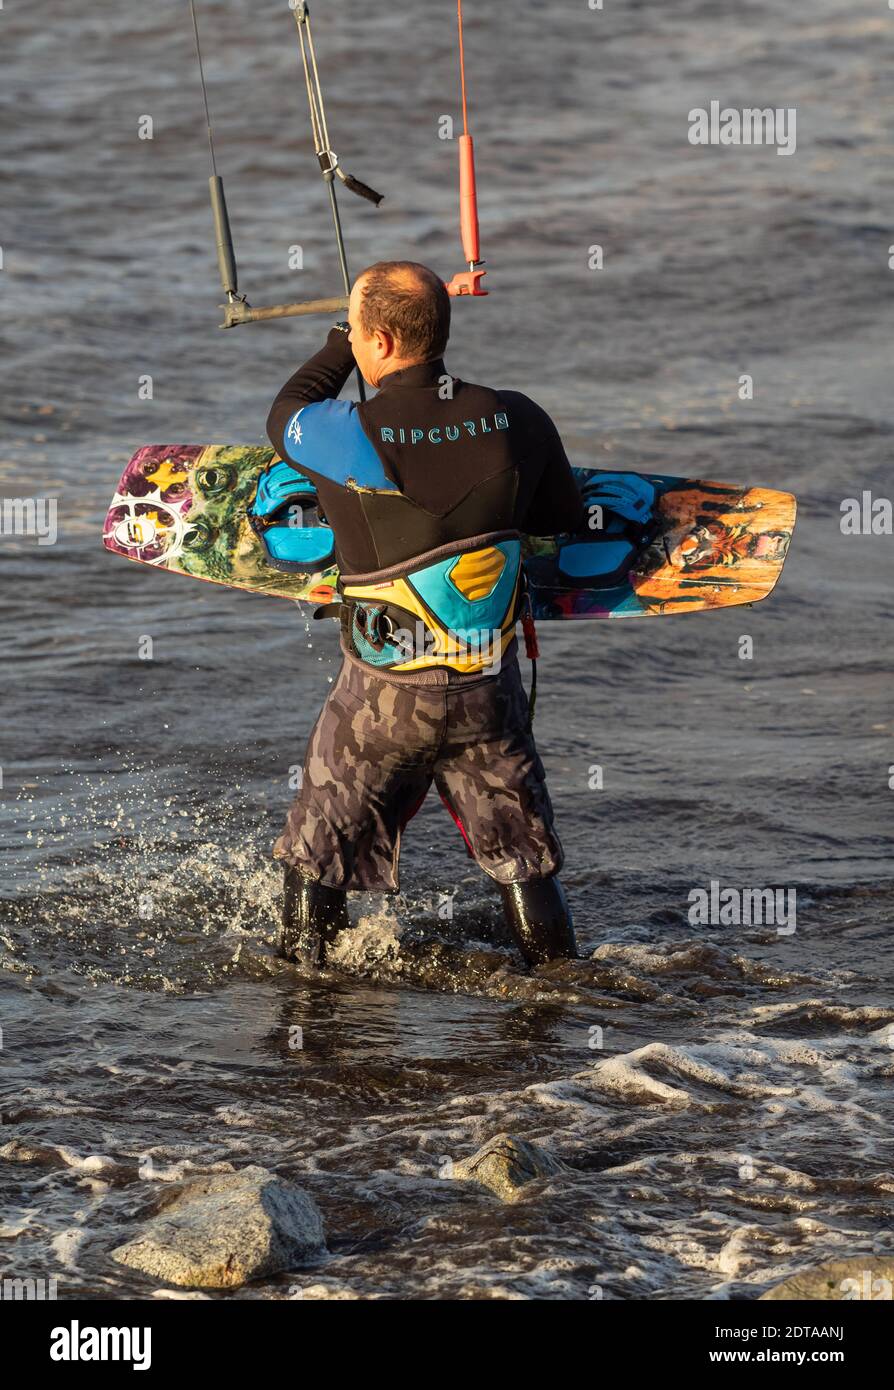 Kite surfer entering the water on the beach. White Rock, British Columbia, Canada. October 13,2020. Selective focus, sport photo, vertical. Stock Photo